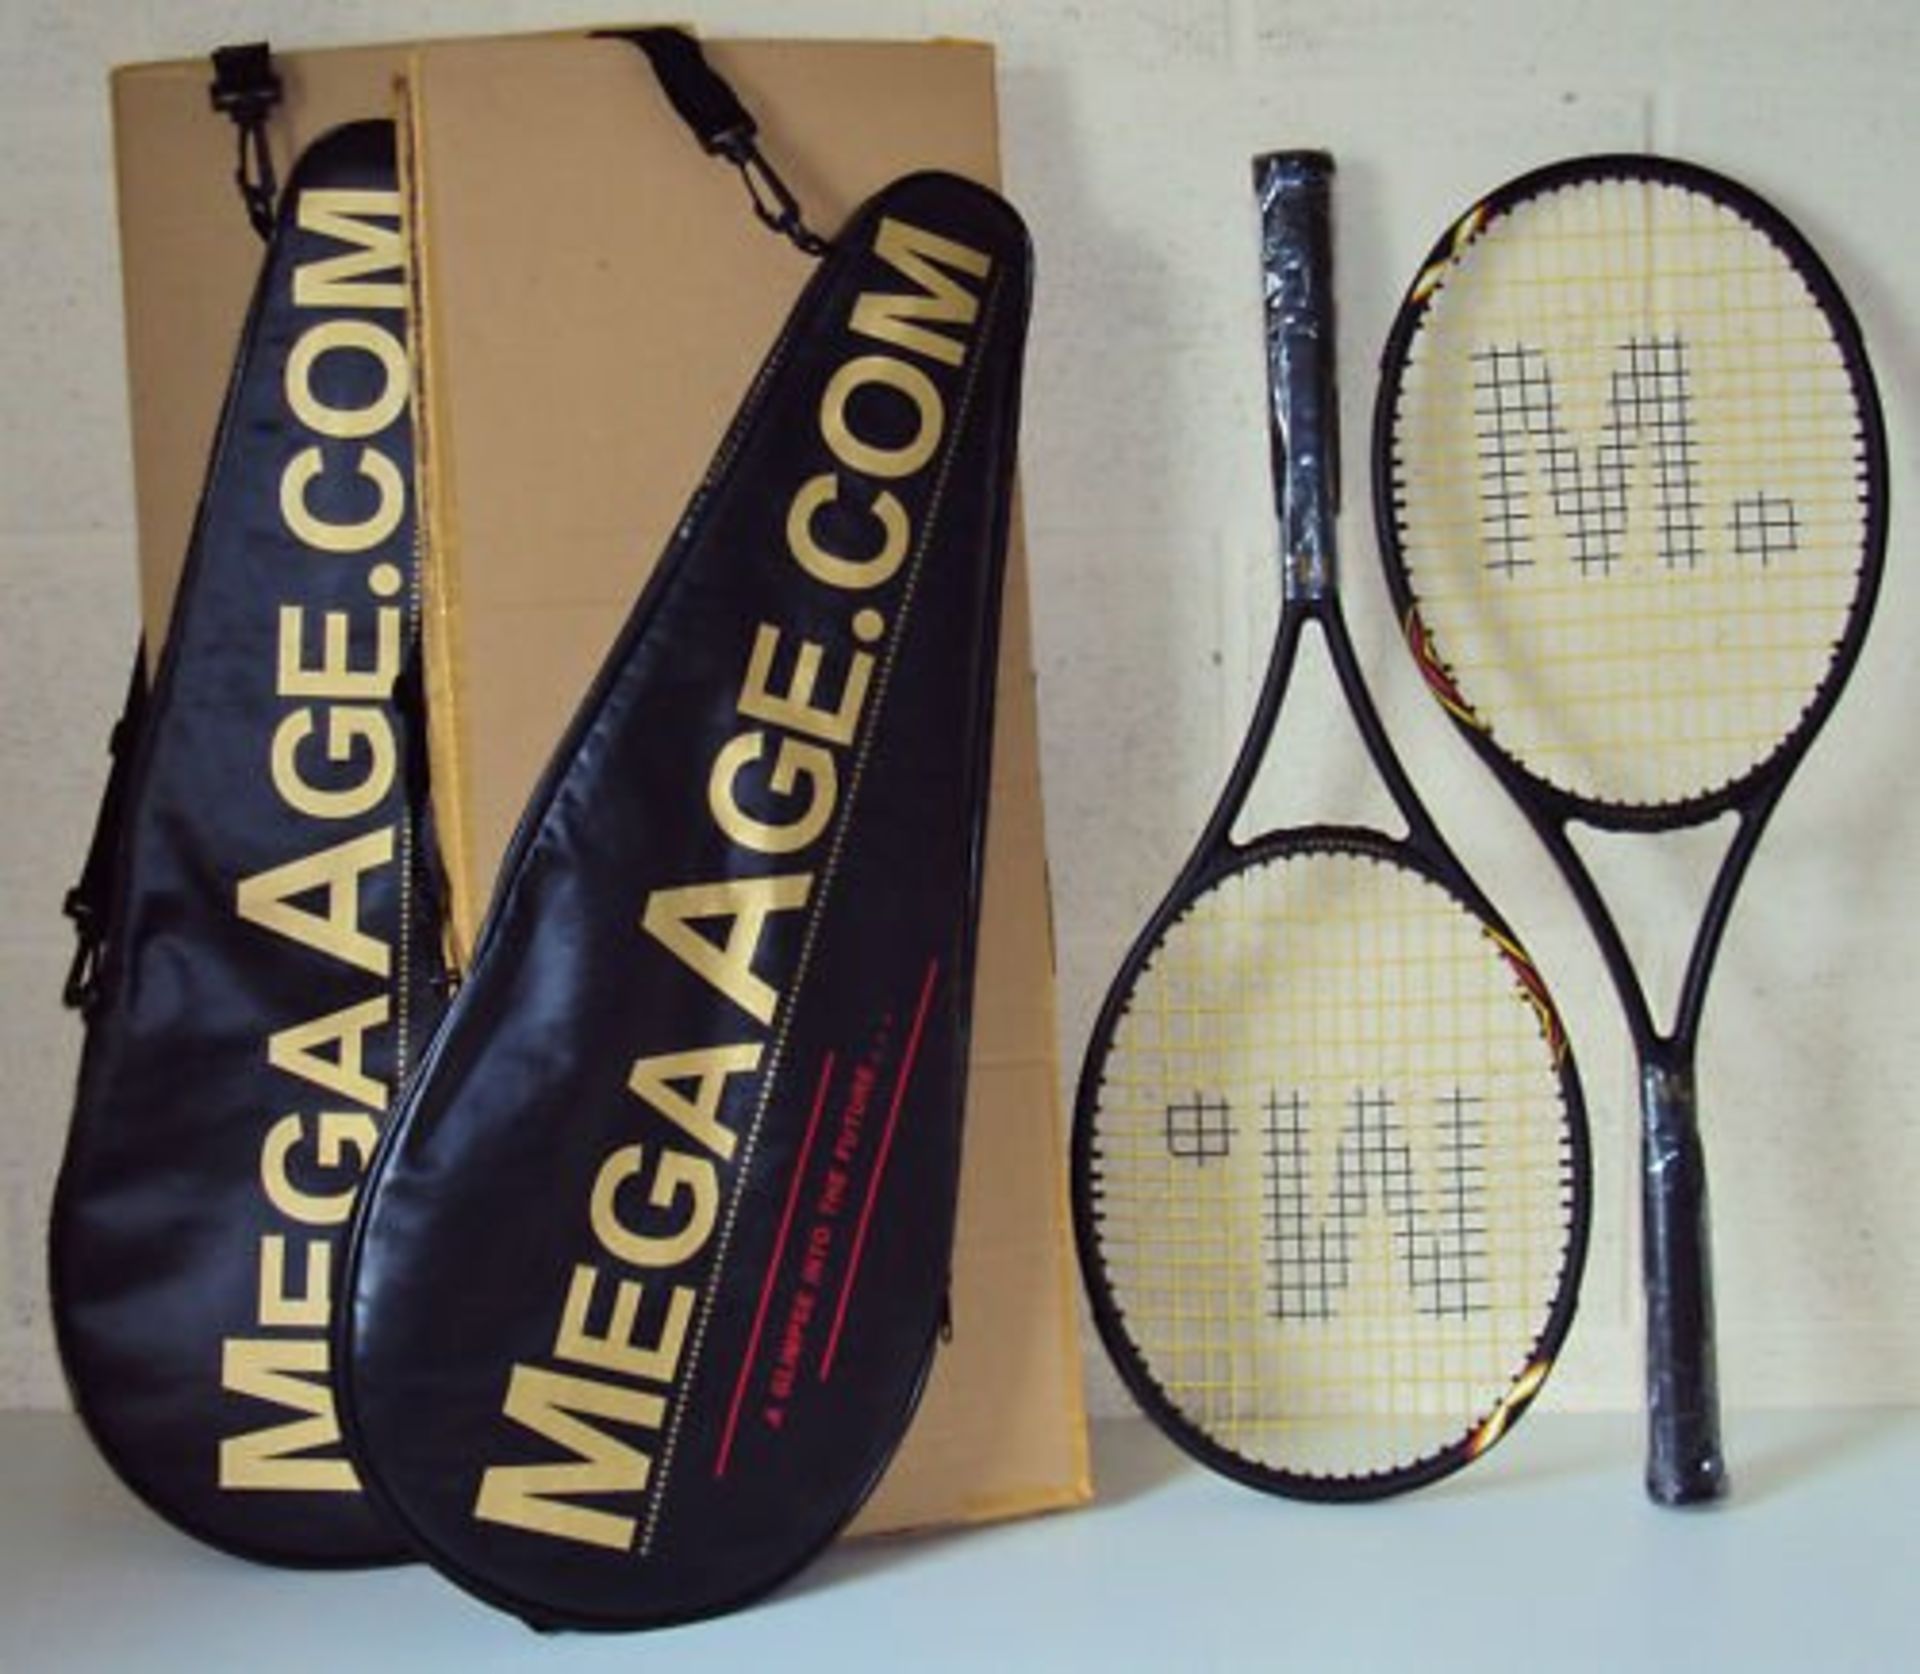 Box of 10 x MegaAge Mega1 Tennis Rackets Voted best value club player racket Medium Weight, - Image 2 of 2